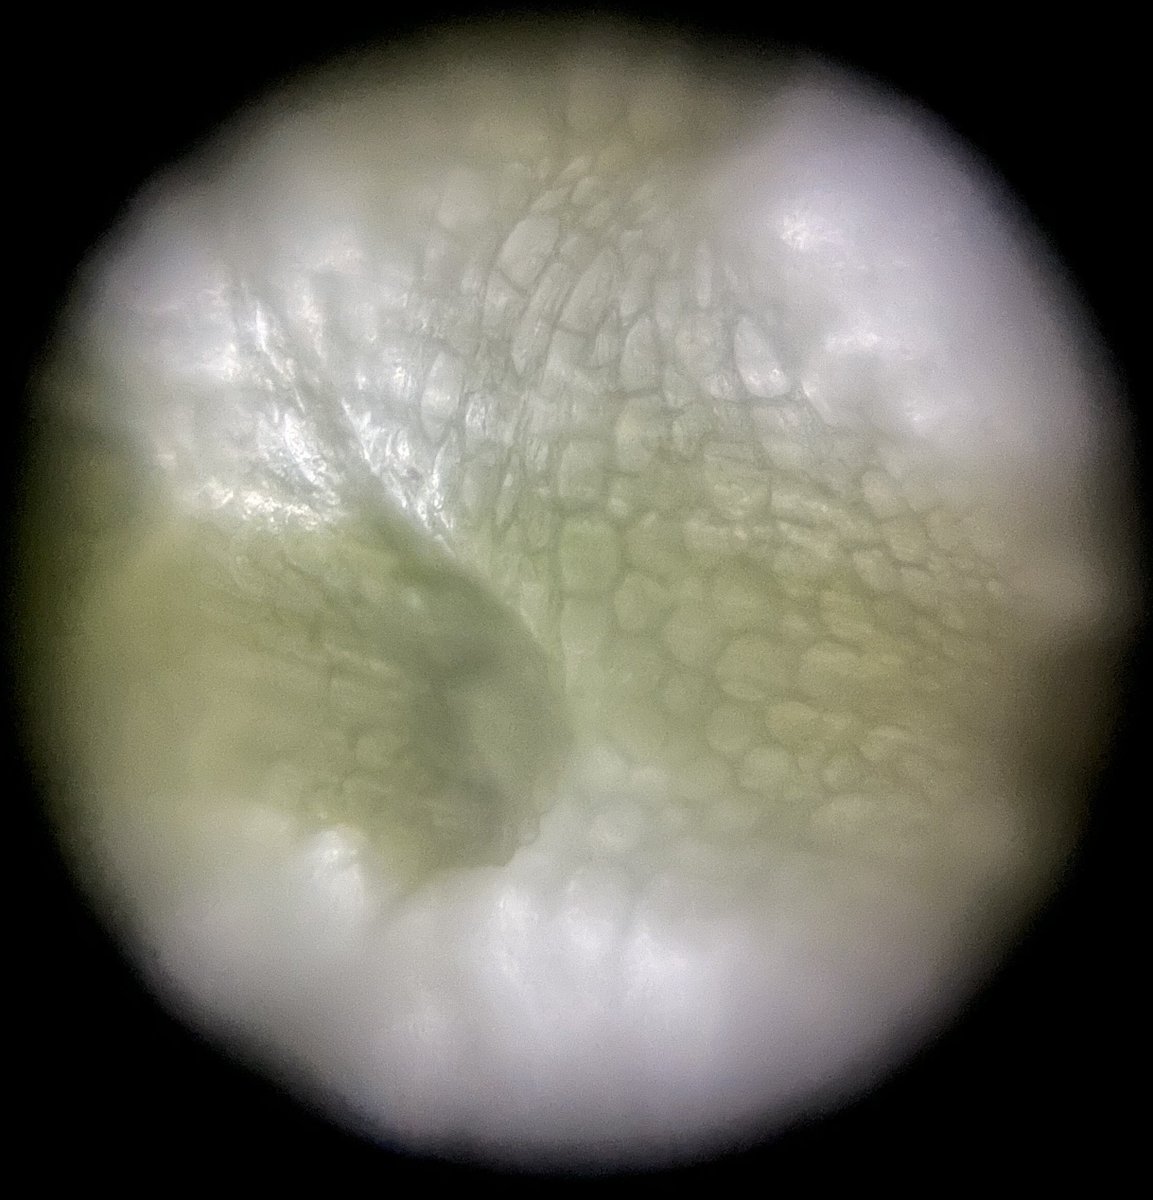 Adventures In Microscopy: The MicroRealms Projector!!

Pictures of asparagus stem cross sections with diff stains using the Foldscope 2.0 & the NEW MicroRealms Projector. Can you tell which is which?

1/7 No Stain

#FearlessMicroscopy #ScienceIsFun #ScienceIsBeautiful